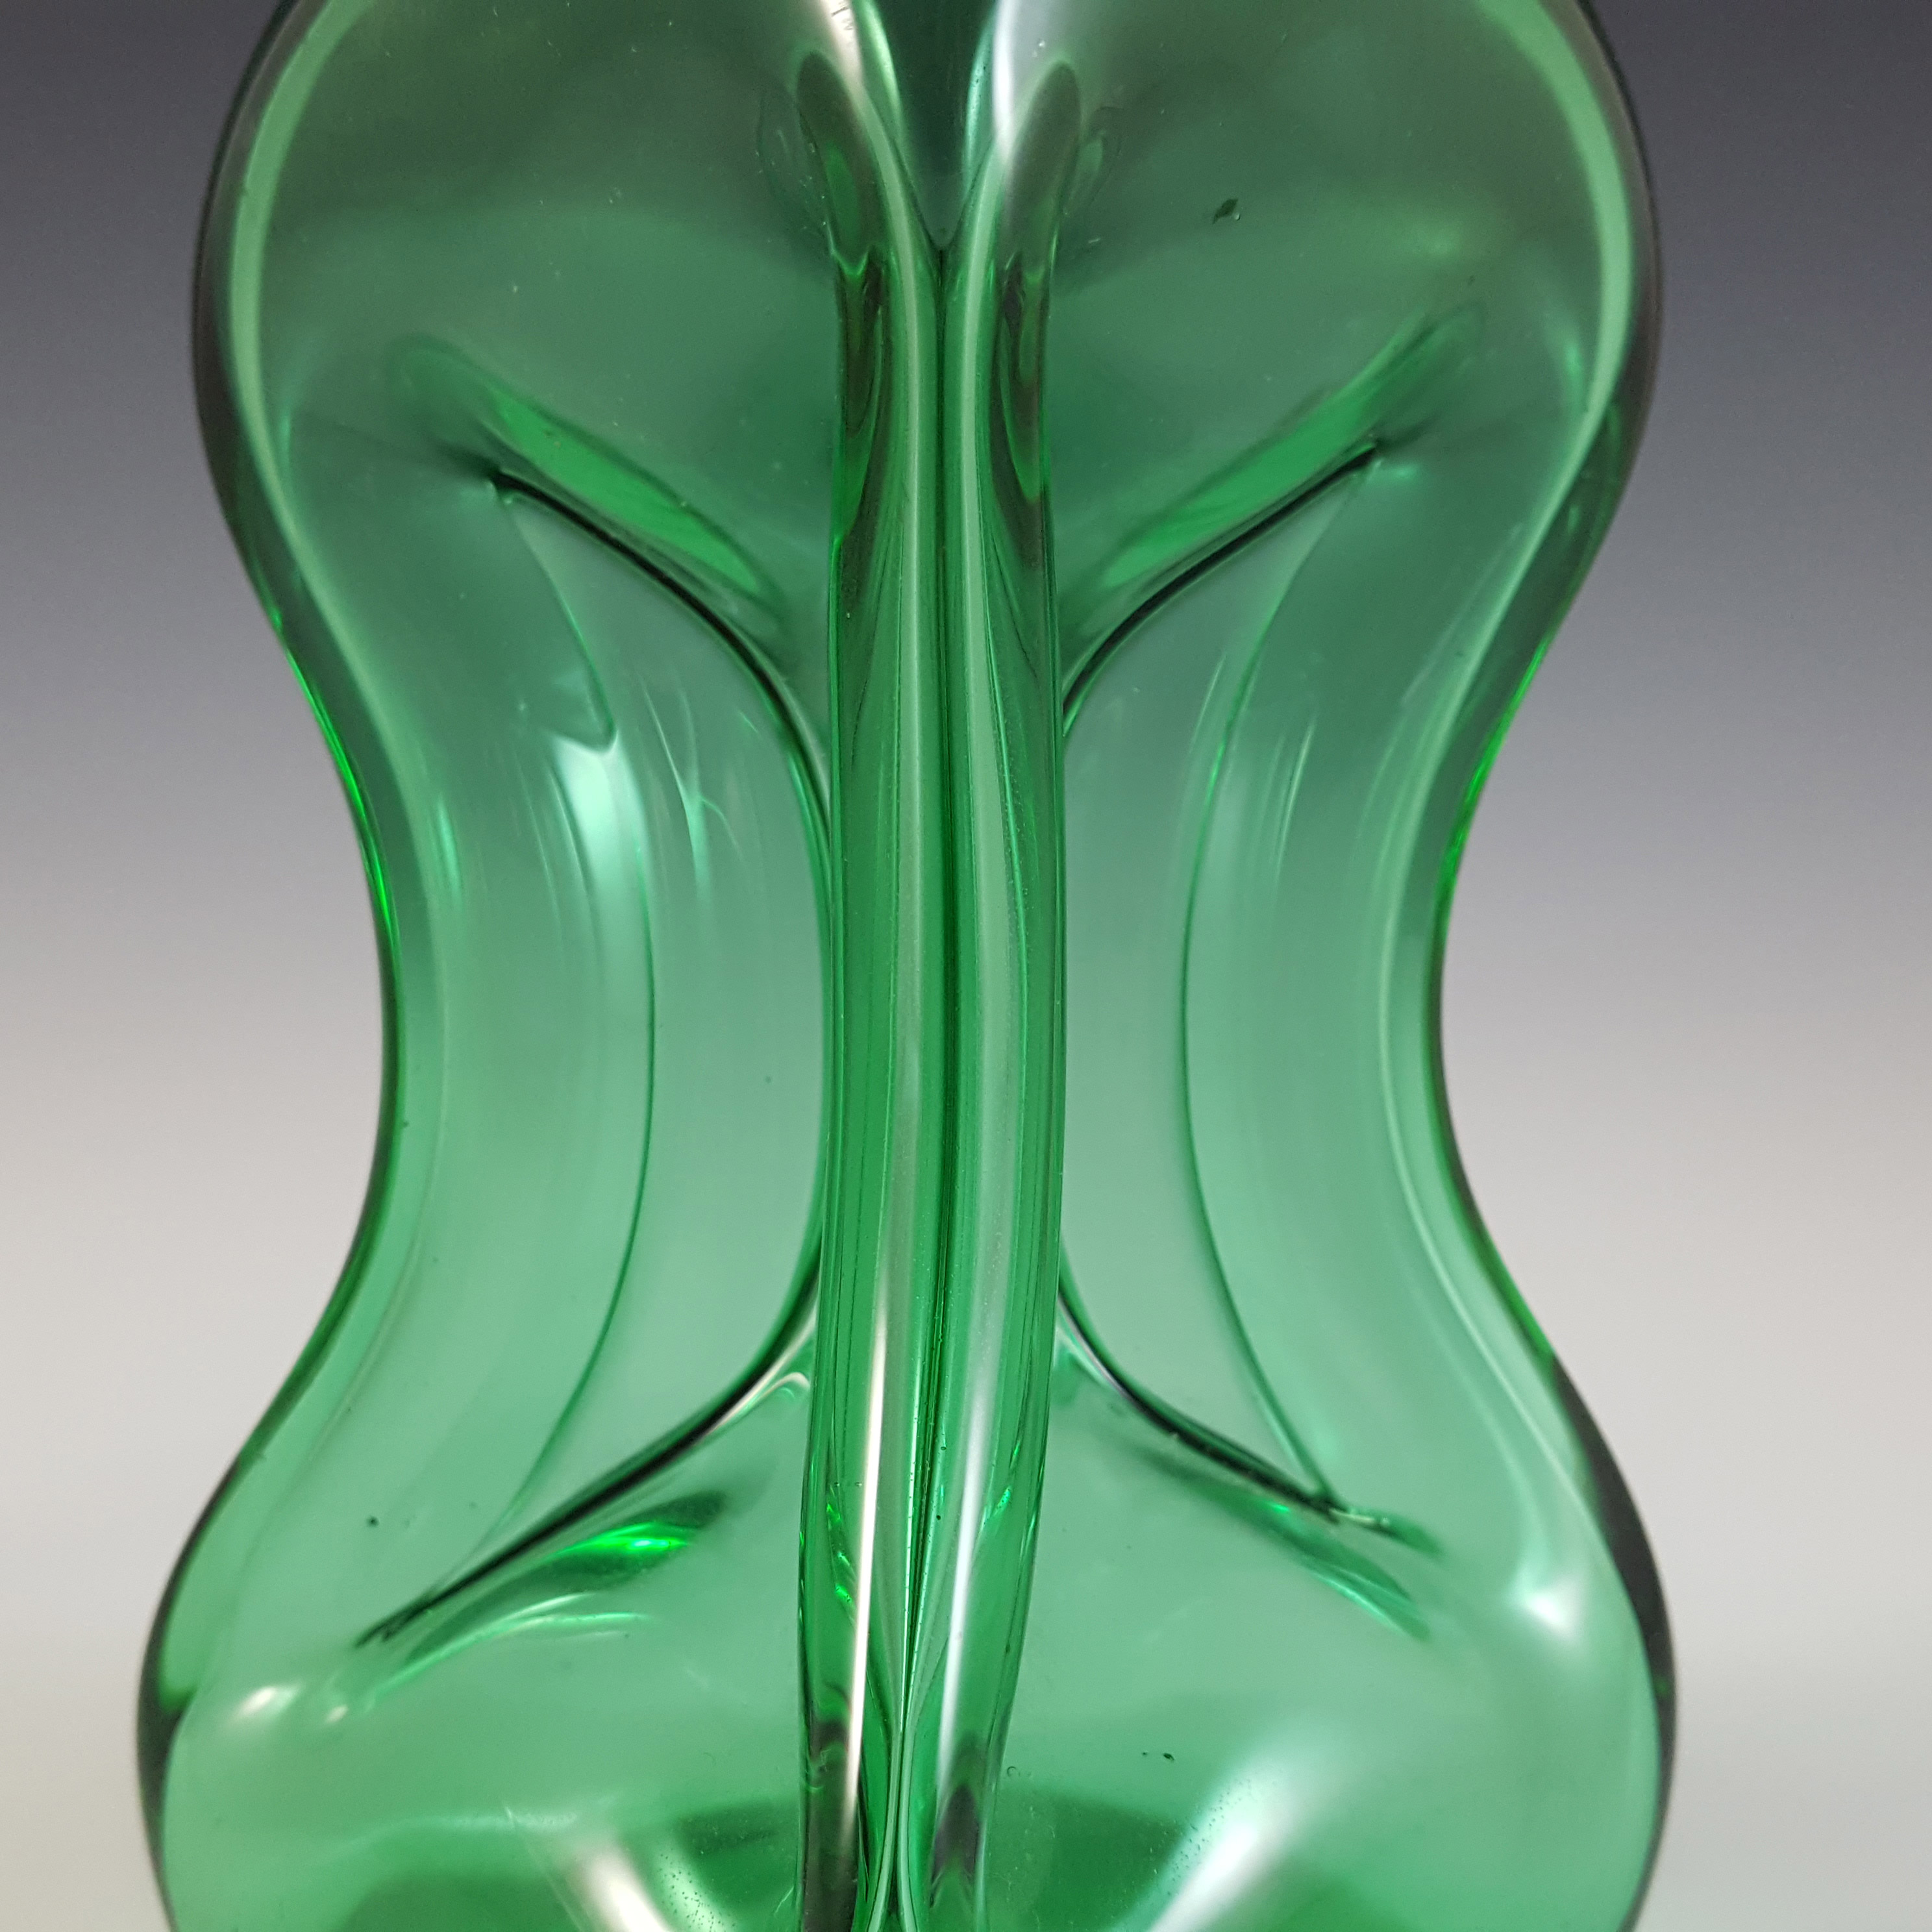 Mantorp Glasbruk Swedish Green Glass 'Cluck Cluck' Decanter / Bottle - Click Image to Close